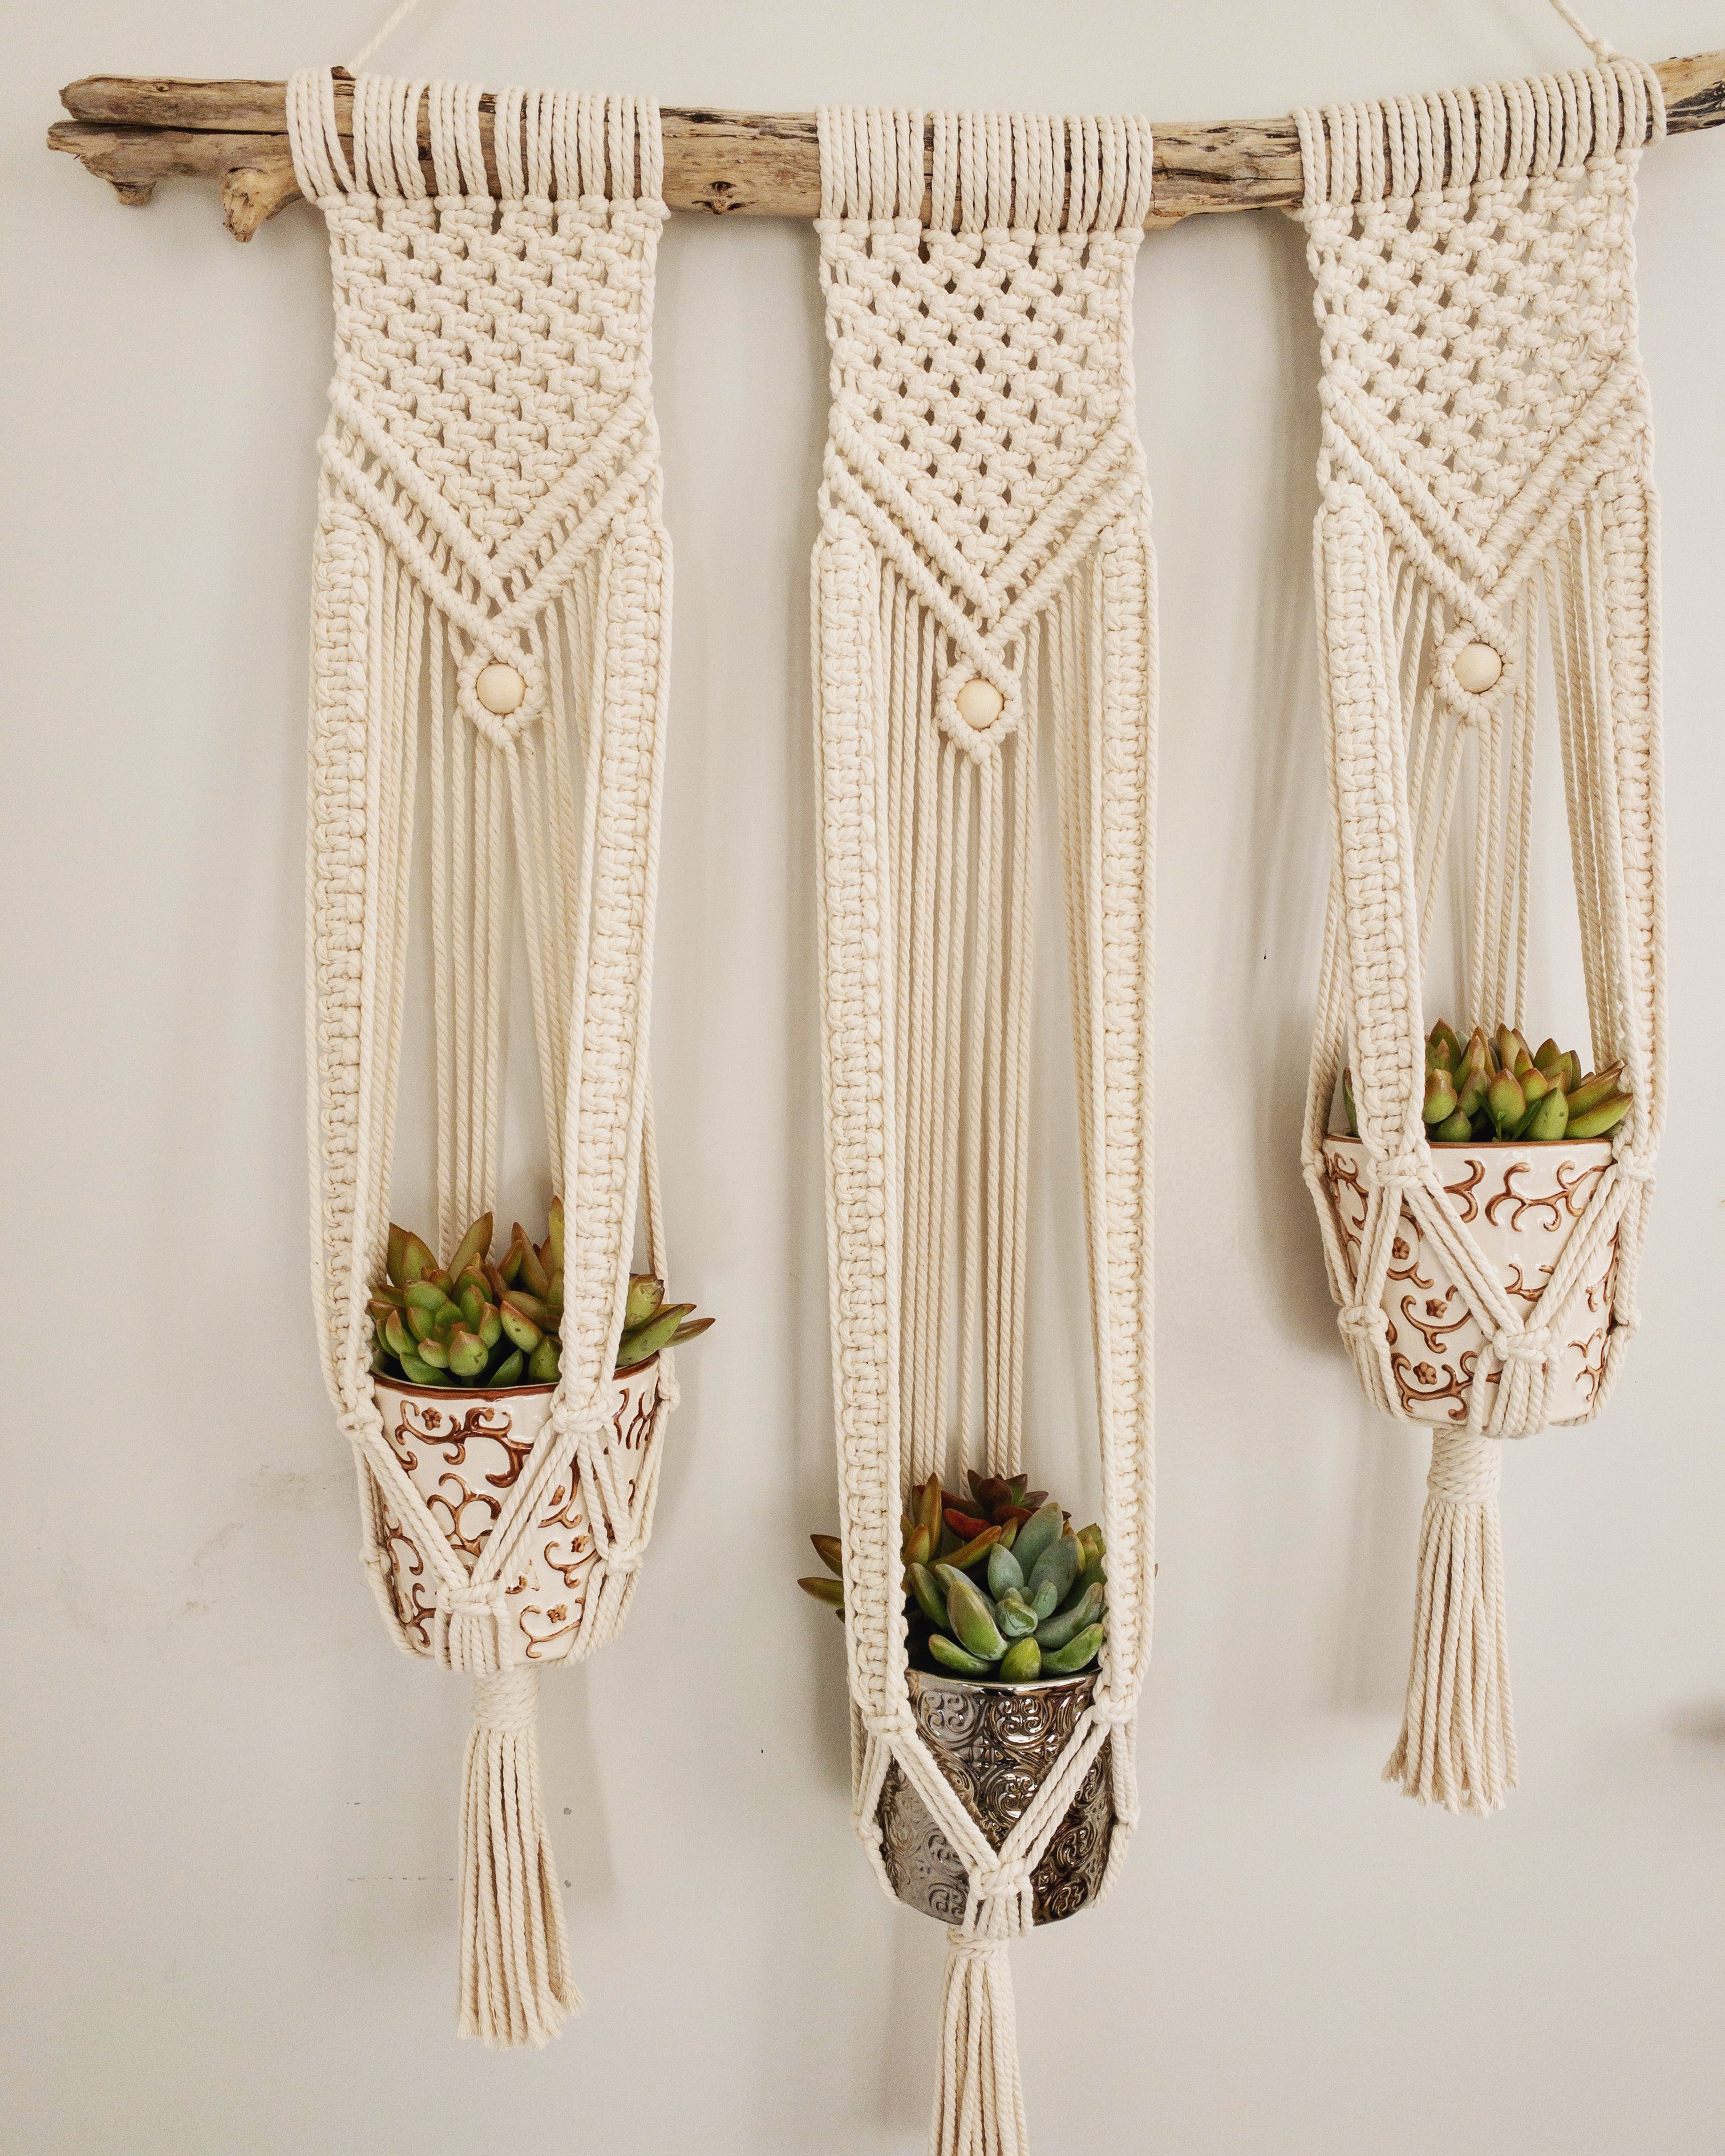 Wall Hanging Plant Hanger Trio w/ Beads